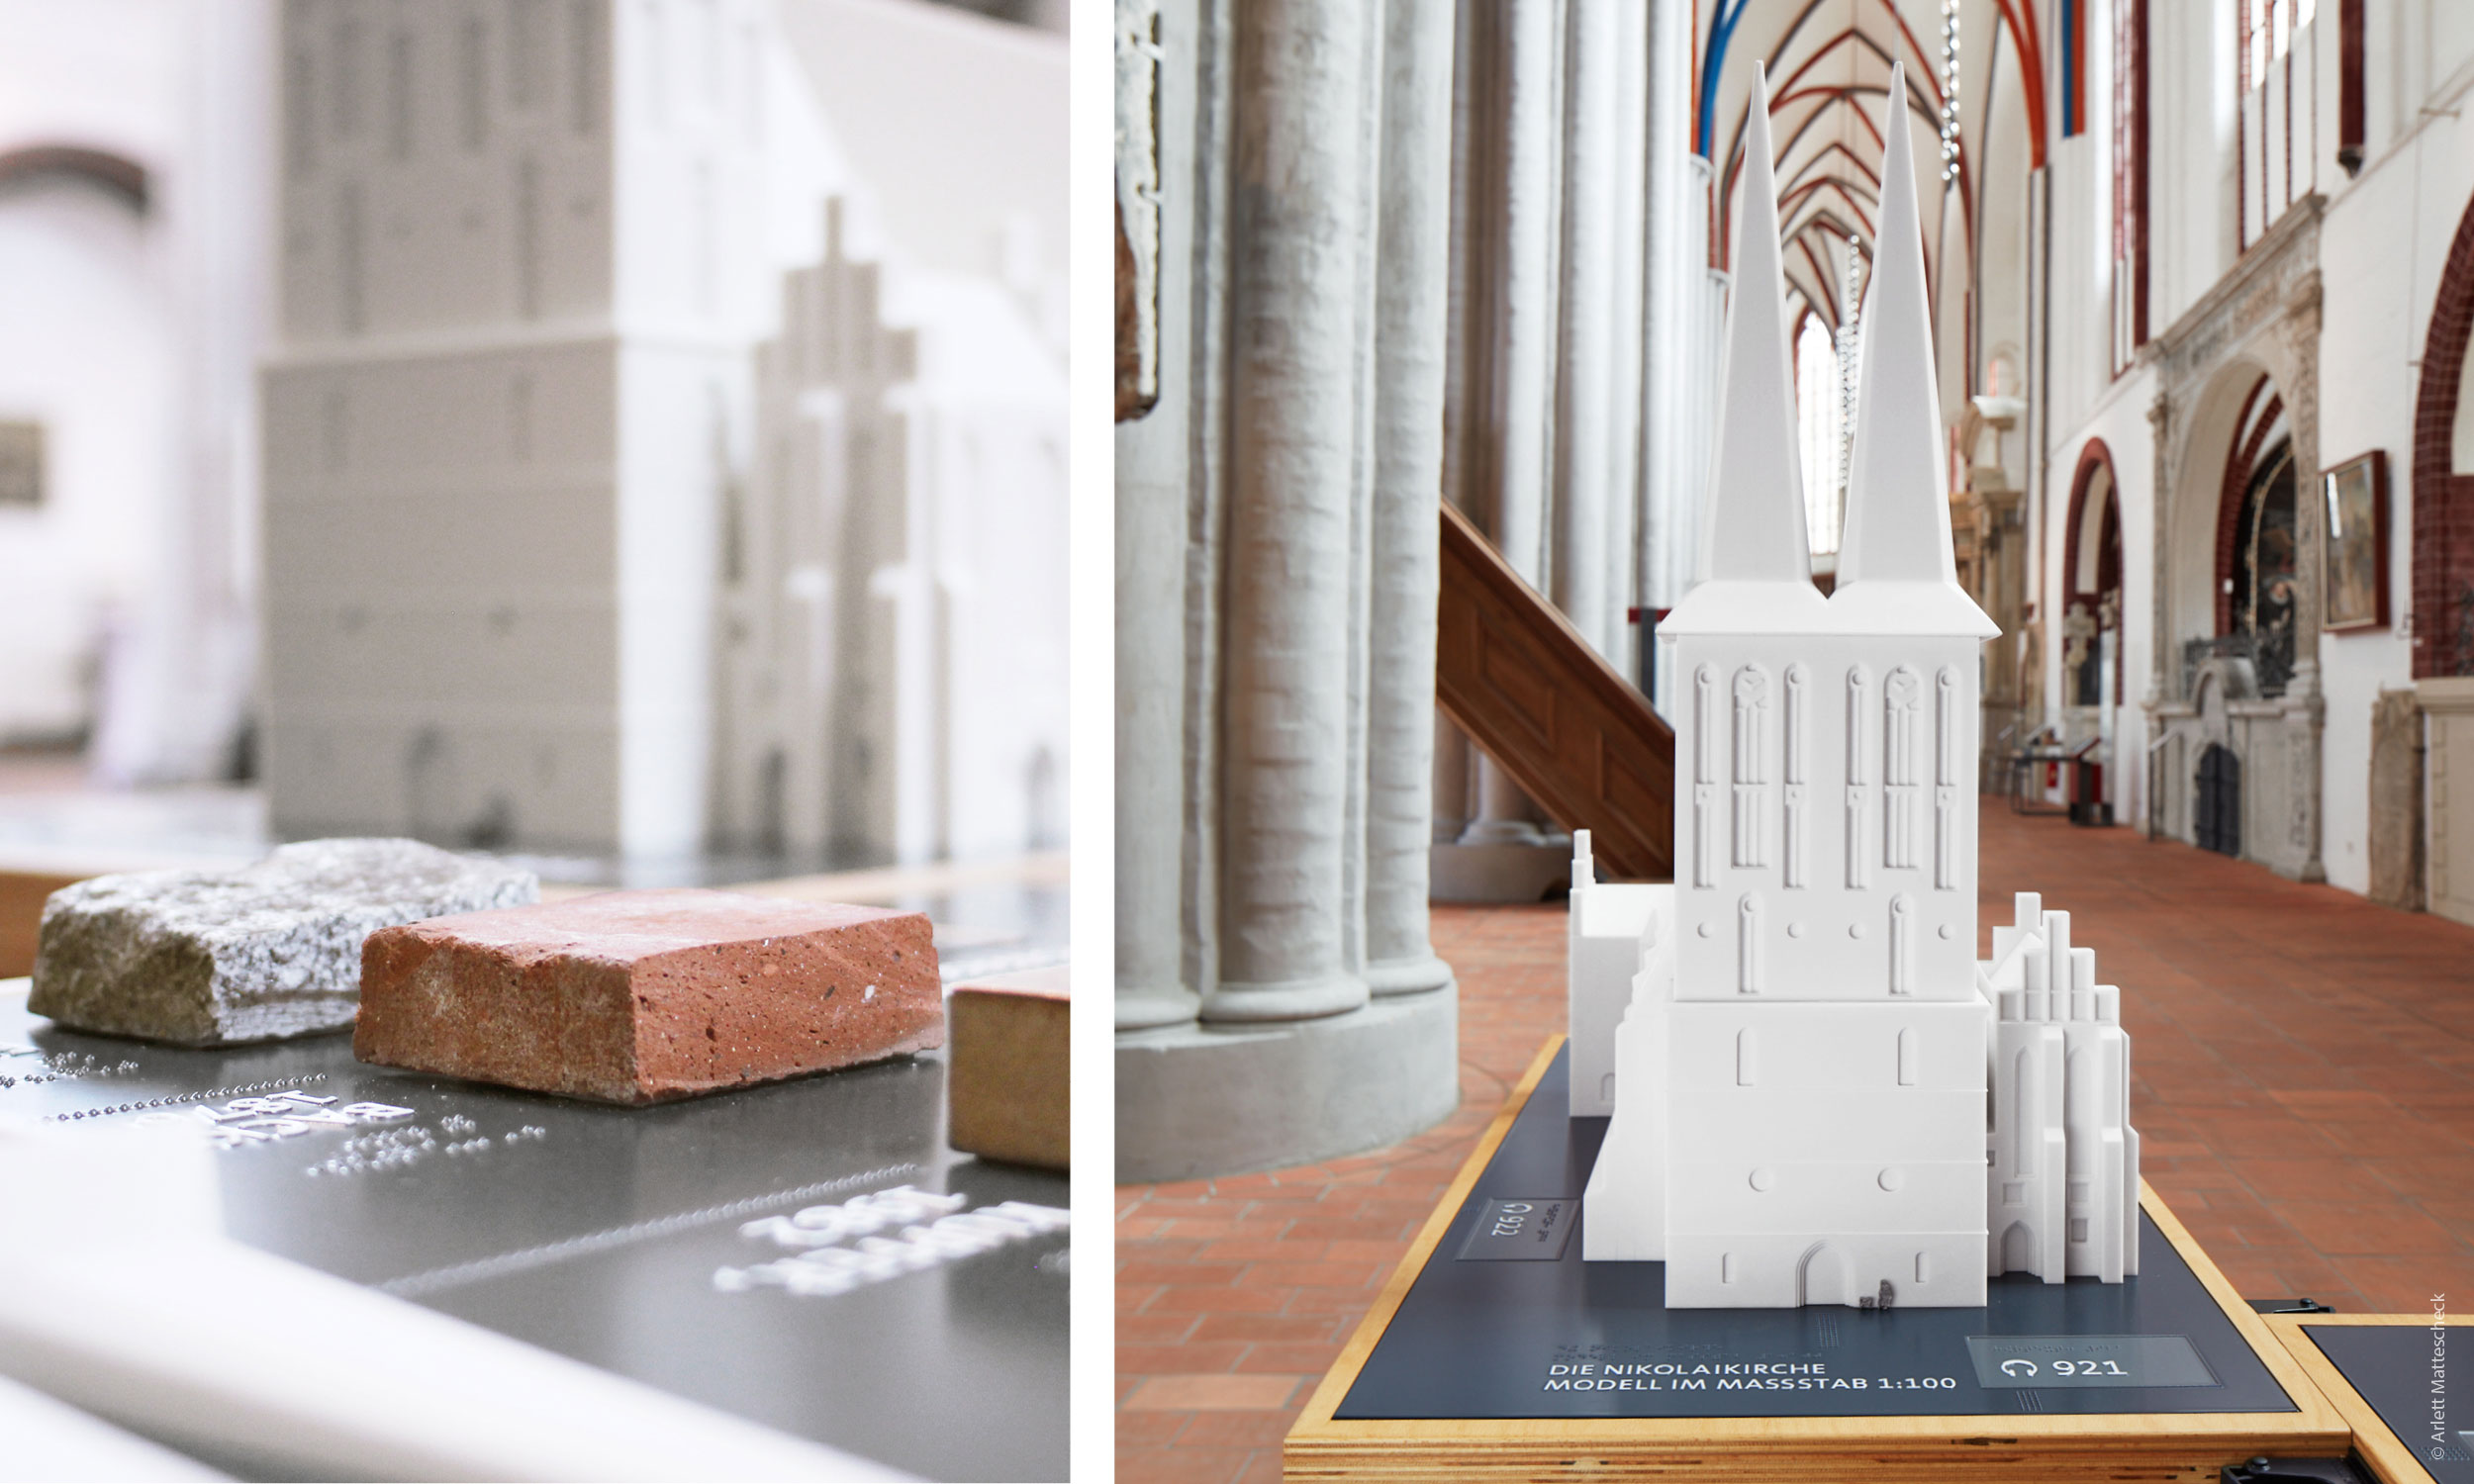 Left: The photo shows the material samples of the west facade, in the background it shows the complete model of the Nikolaikirche. Right: This photo shows the complete model of the Nikolaikirche, in the background the church room is visible.